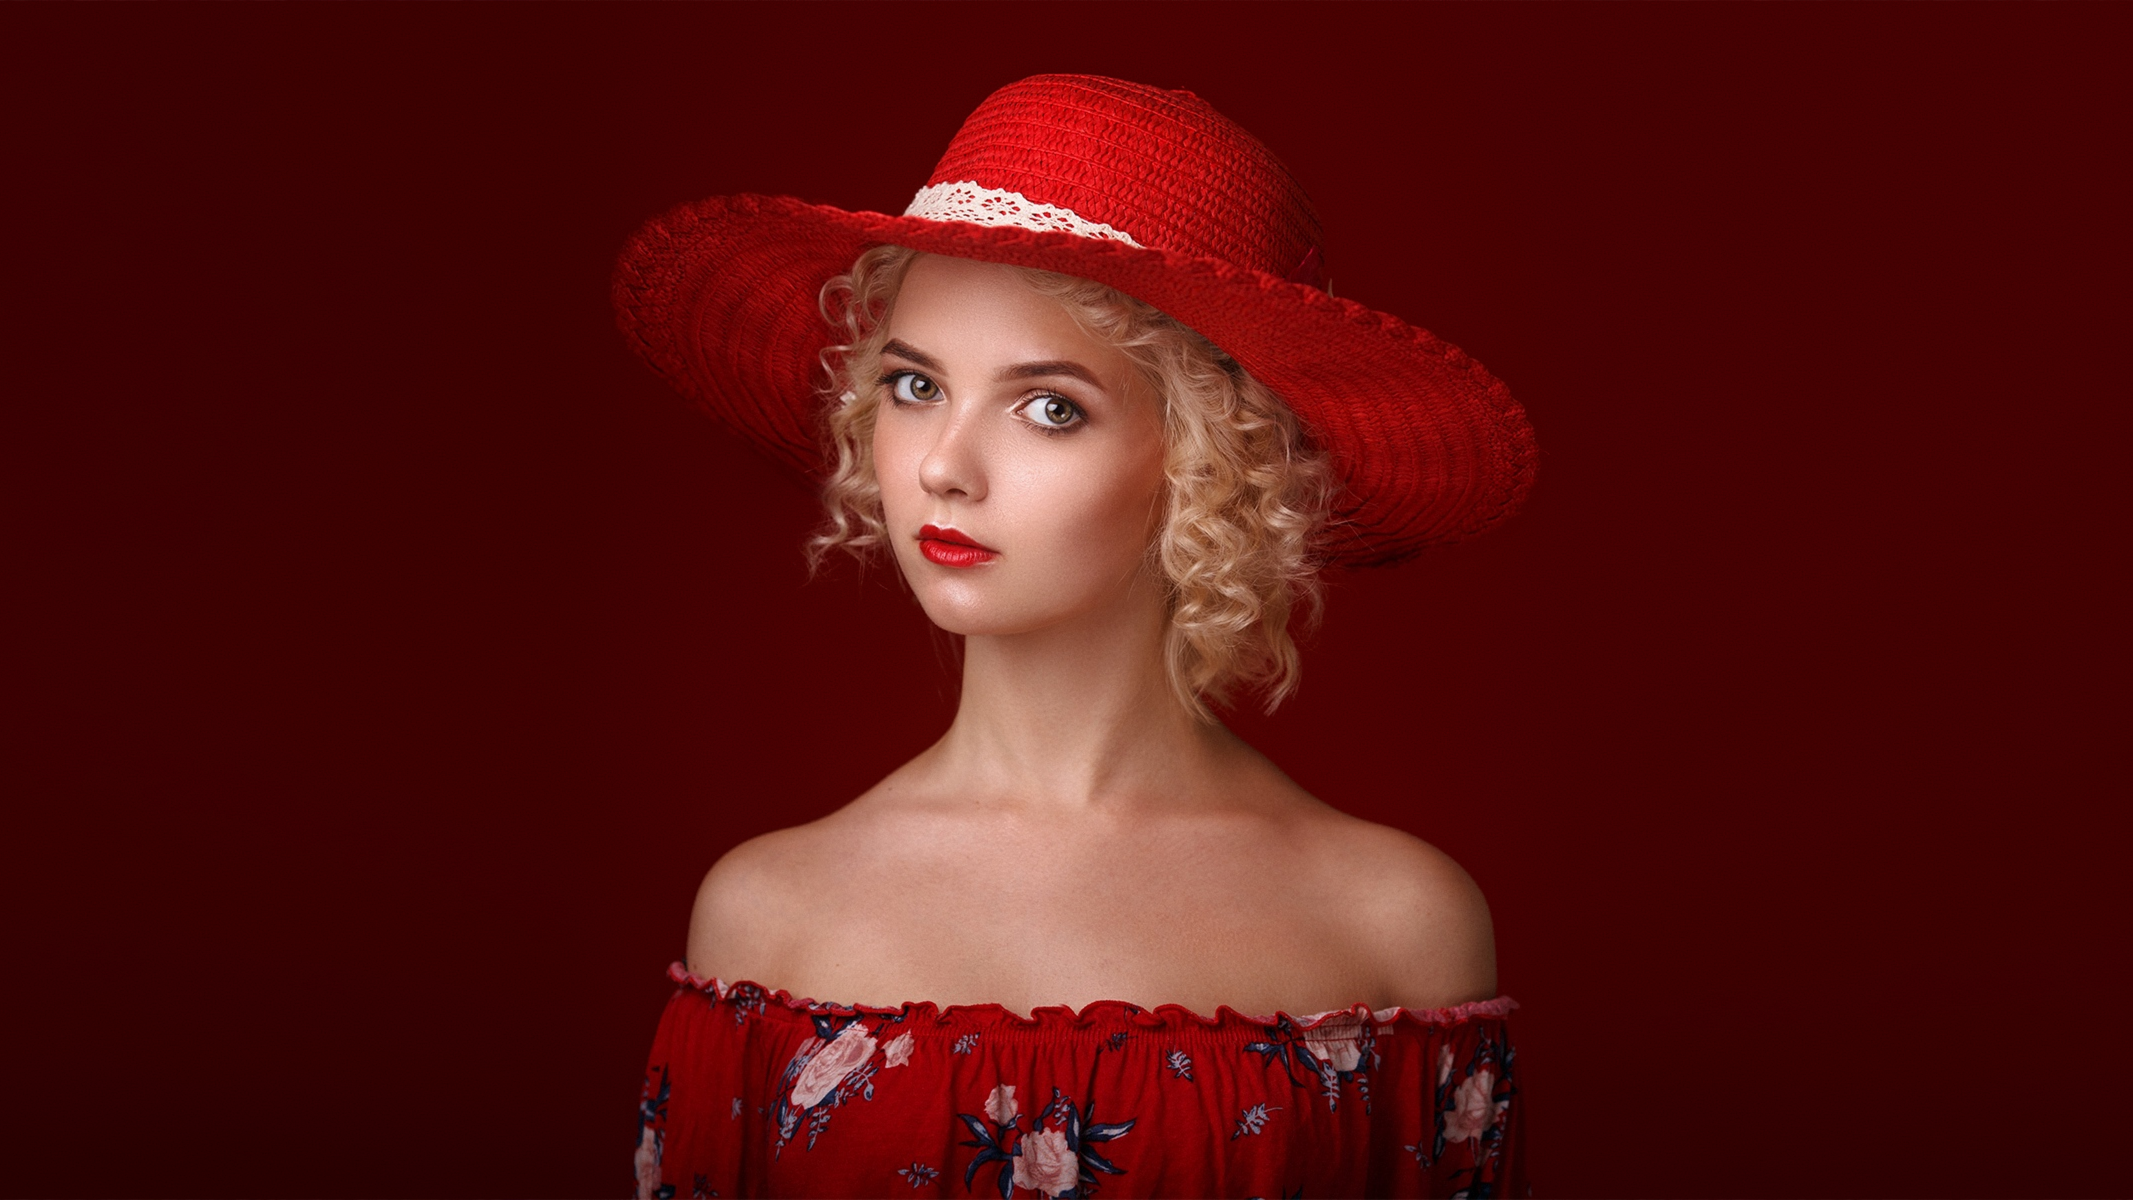 Women Model Blonde Curly Hair Looking At Viewer Red Lipstick Women With Hats Hat Bare Shoulders Crop 2133x1200